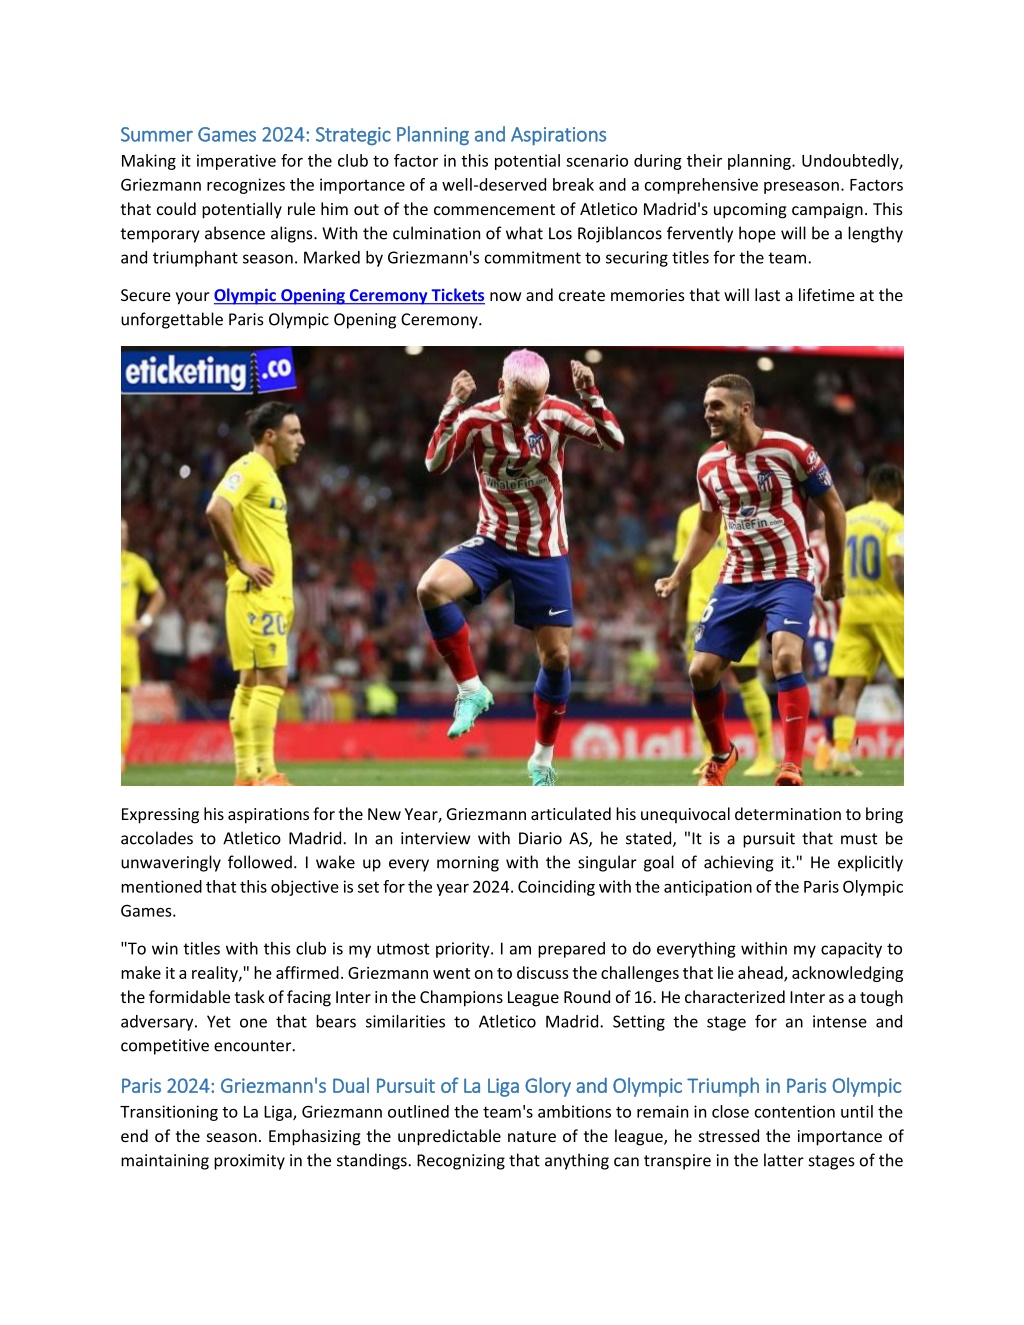 PPT Summer Games 2024 Atletico's Strategy, griezmann's Dual